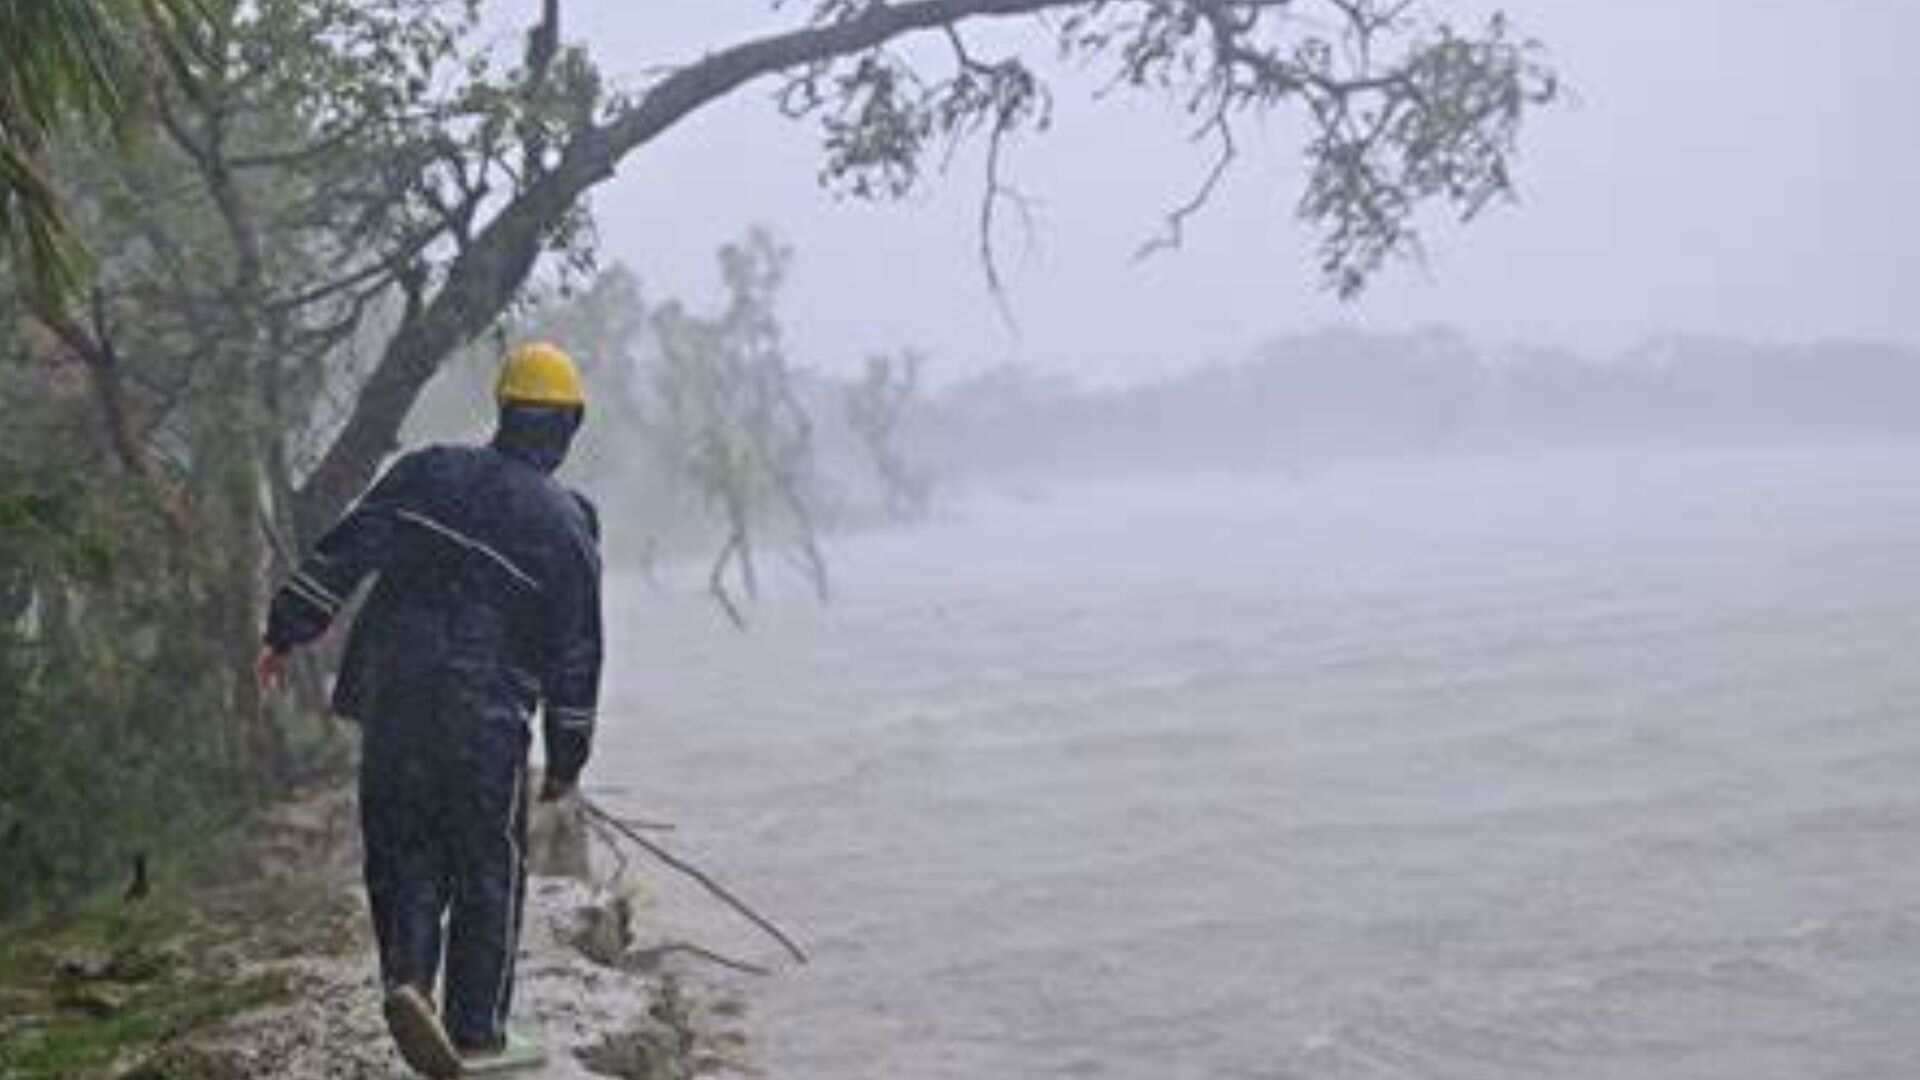 Cyclone Remal: 16 Killed In India and Bangladesh; Power Lines Damaged